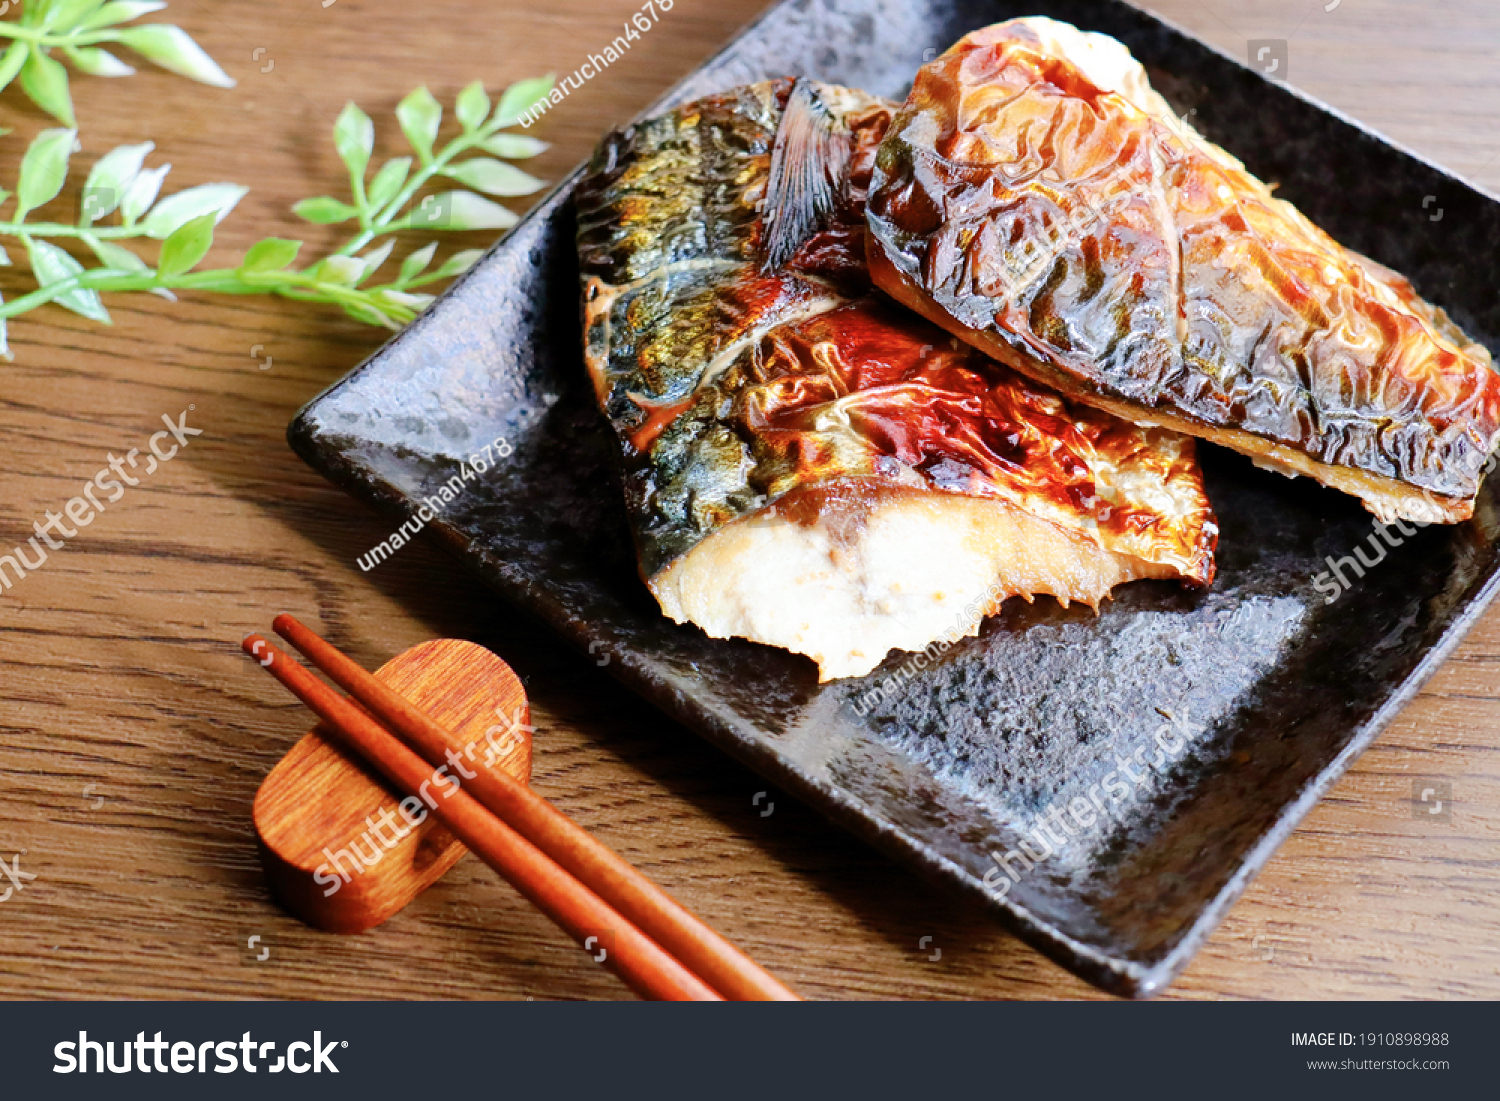 Saba no sio yaki (grilled mackerel). A traditional Japanese grilled fish dish. Two fillets on a black plate. #1910898988